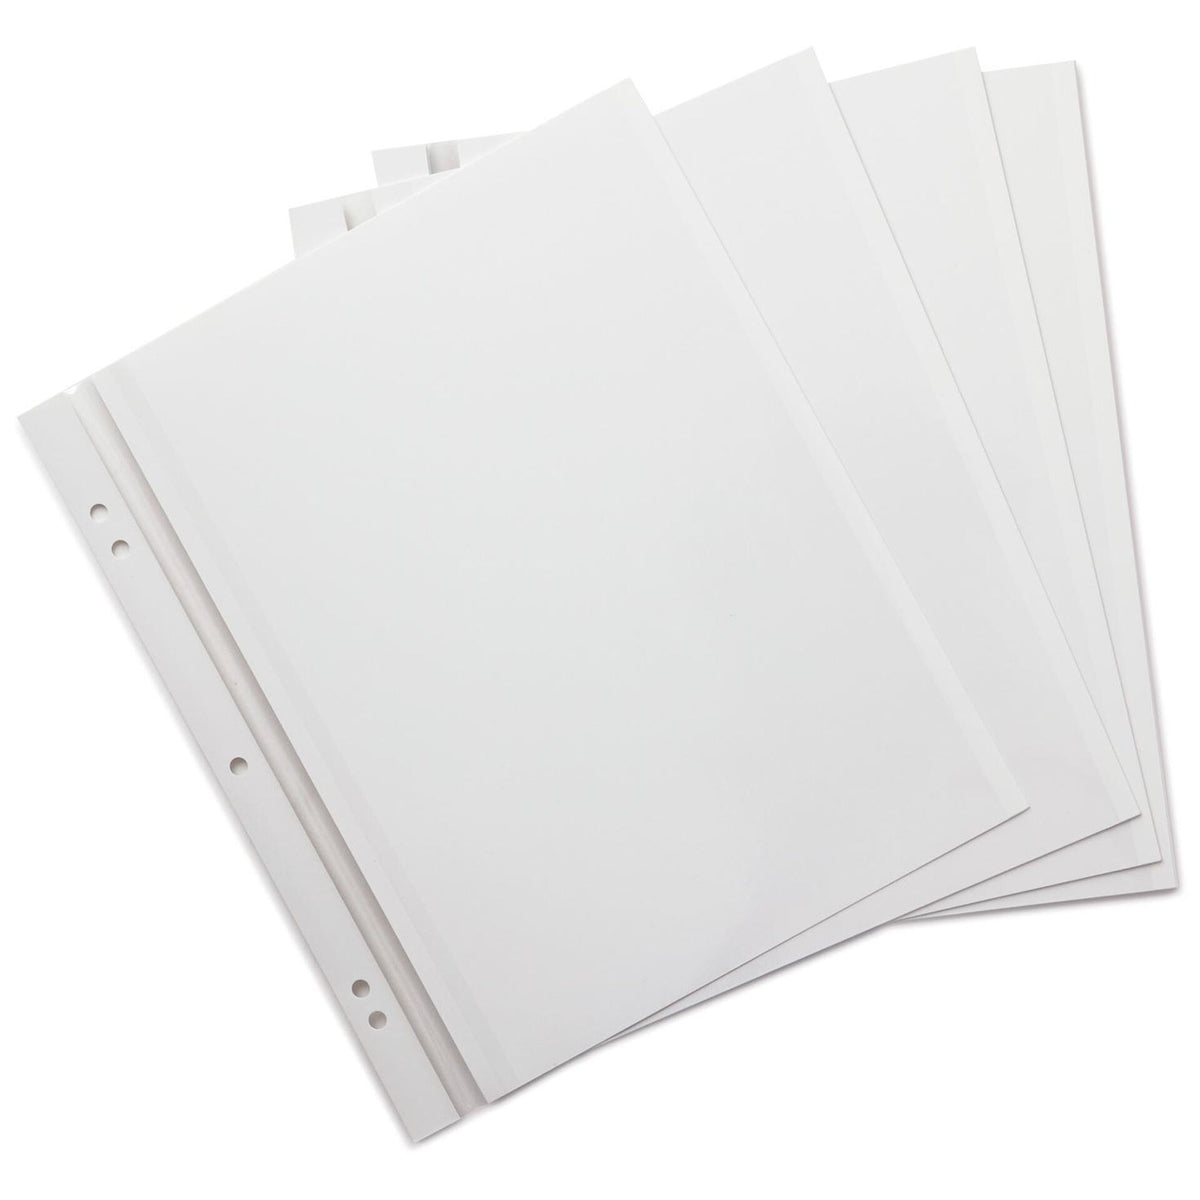 Hallmark Self-Adhesive Pages Refill AR-6508 pkg. 16 Pages